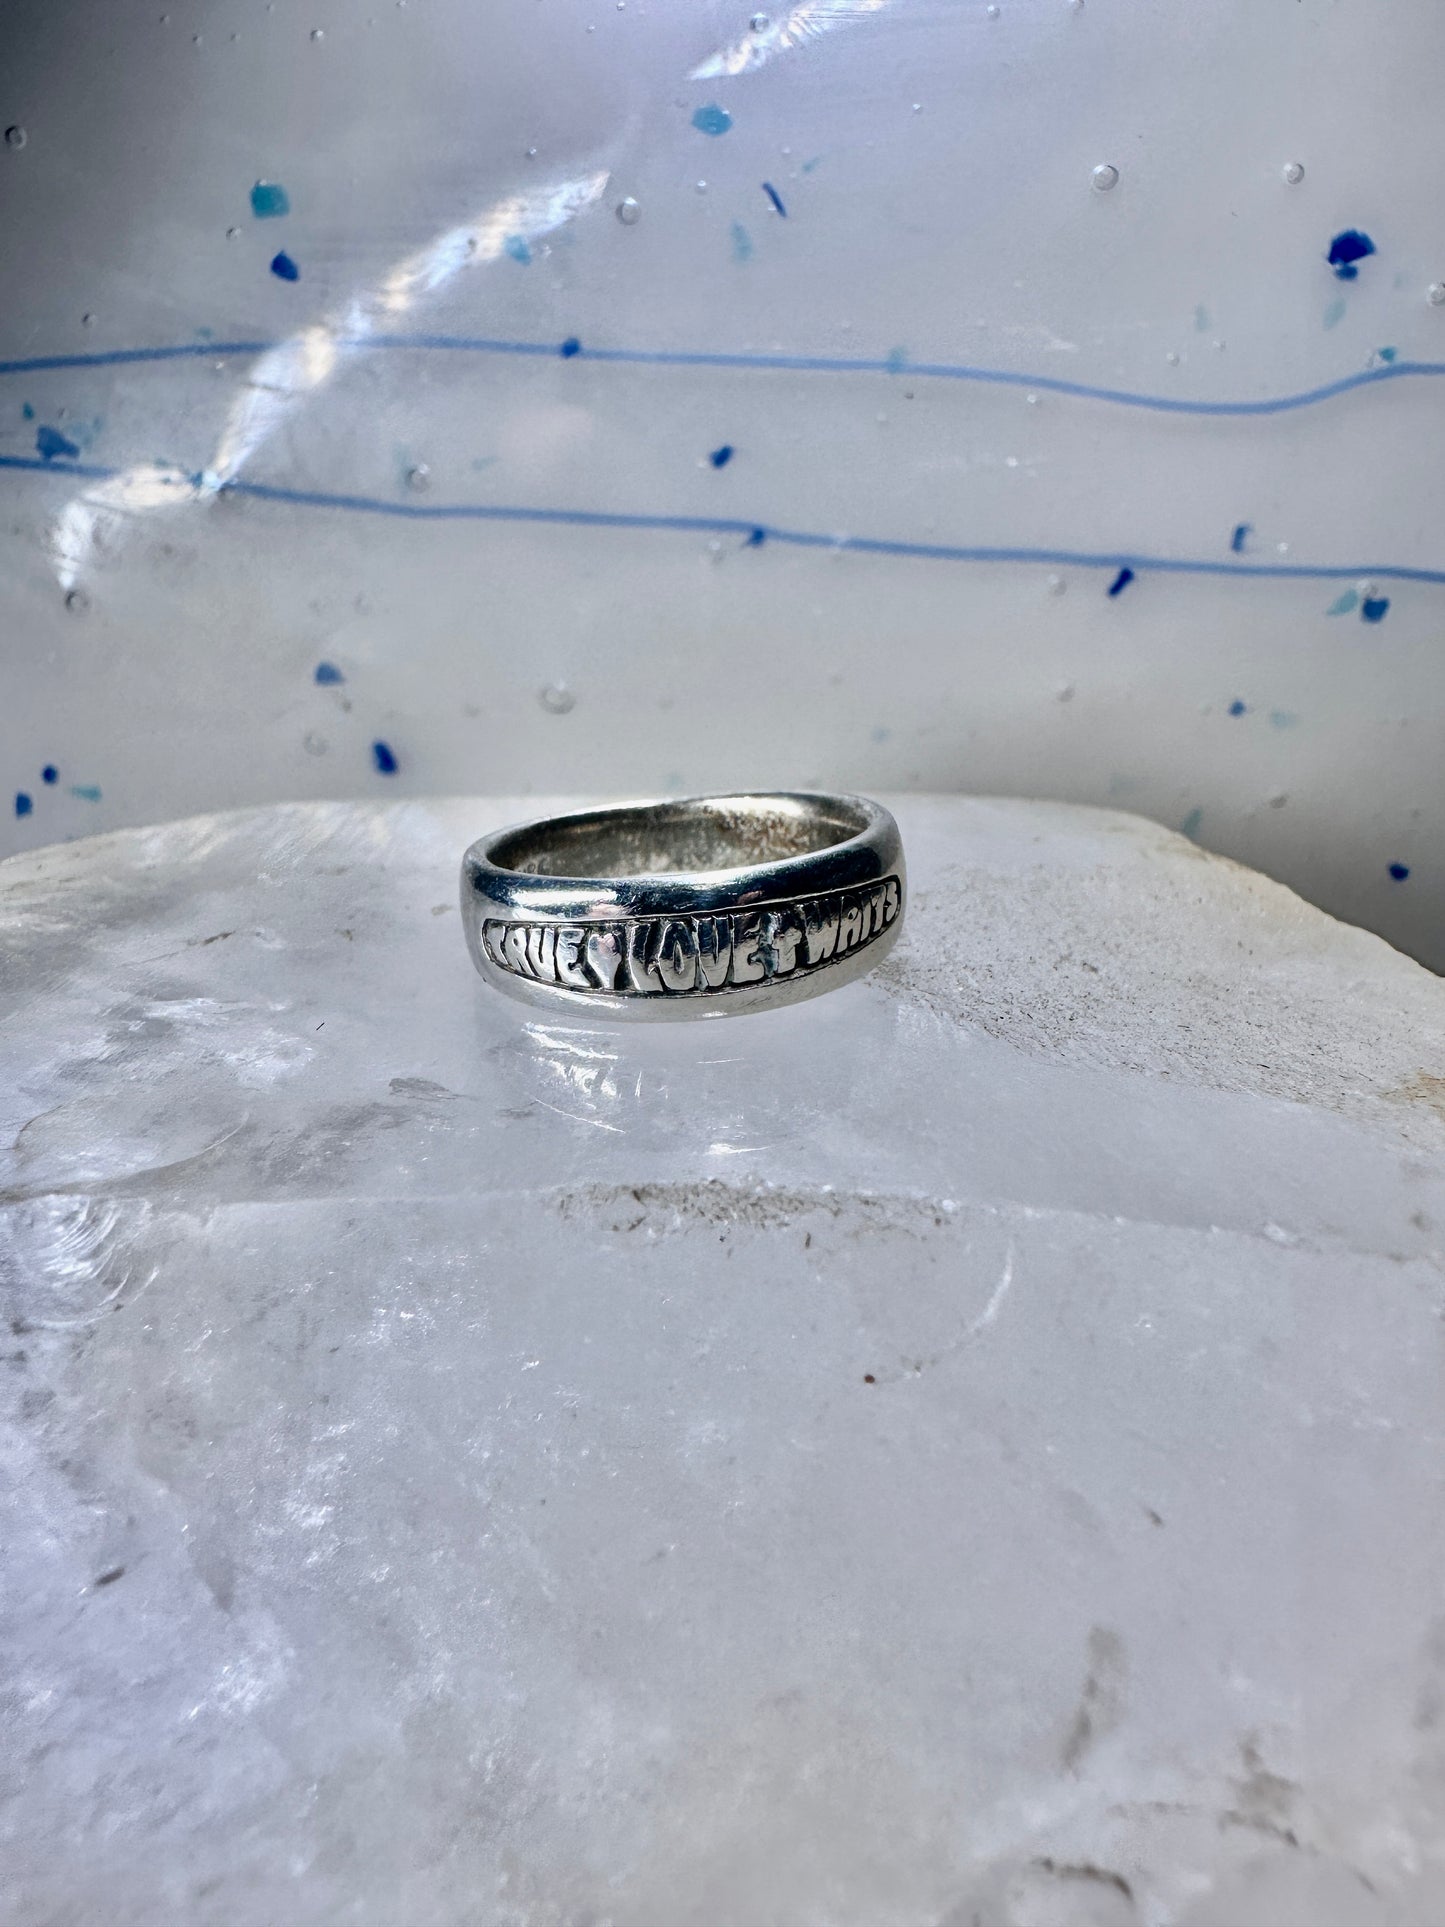 True Love Waits ring Words band size 6.50 sterling silver women